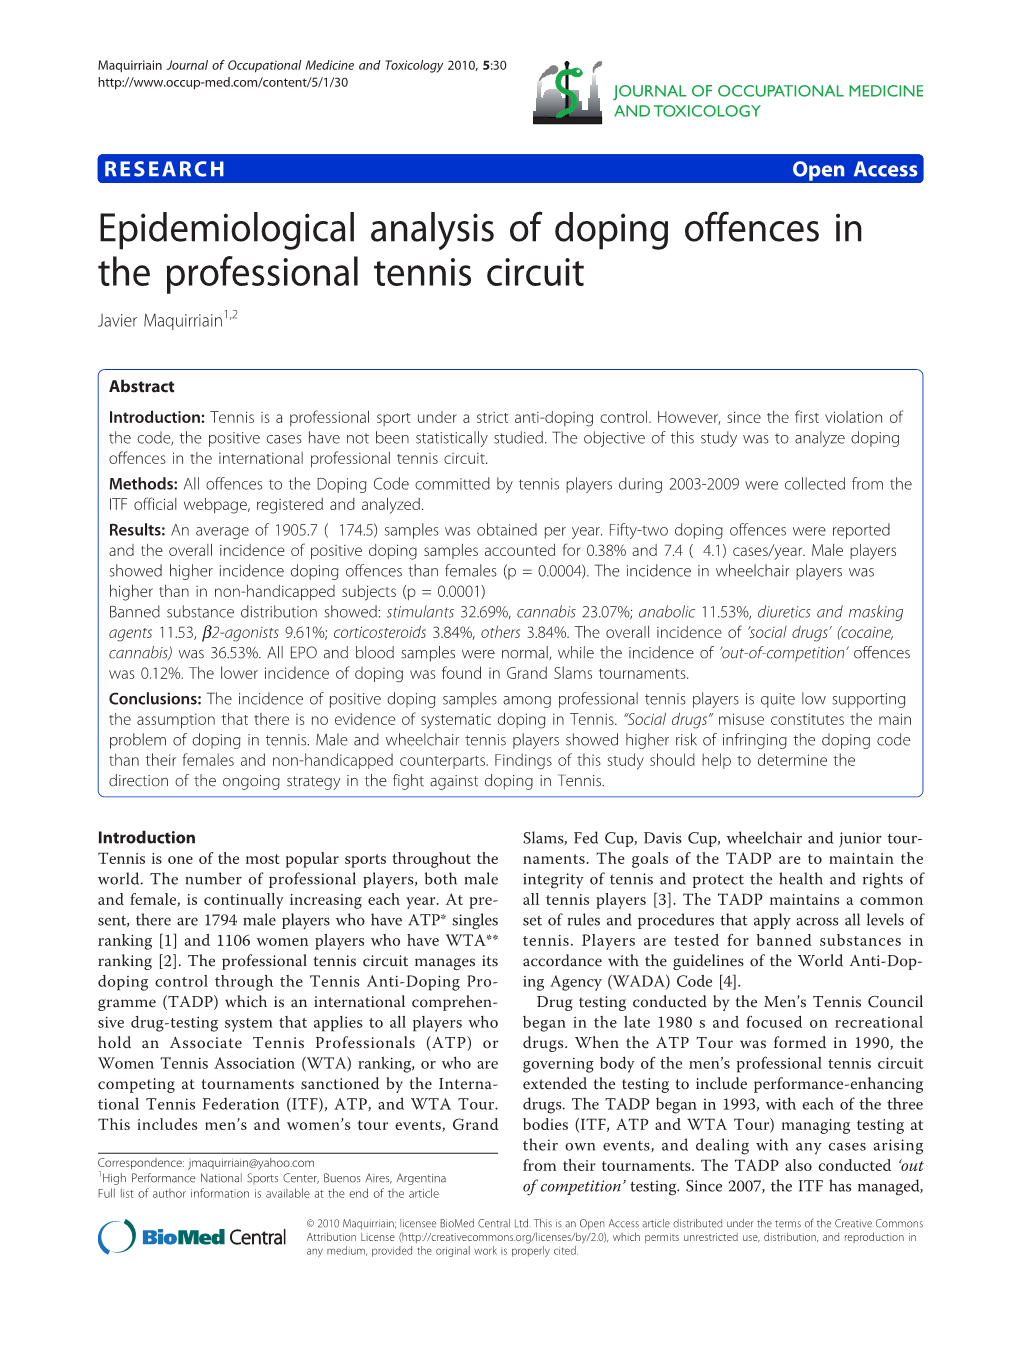 Epidemiological Analysis of Doping Offences in the Professional Tennis Circuit Javier Maquirriain1,2